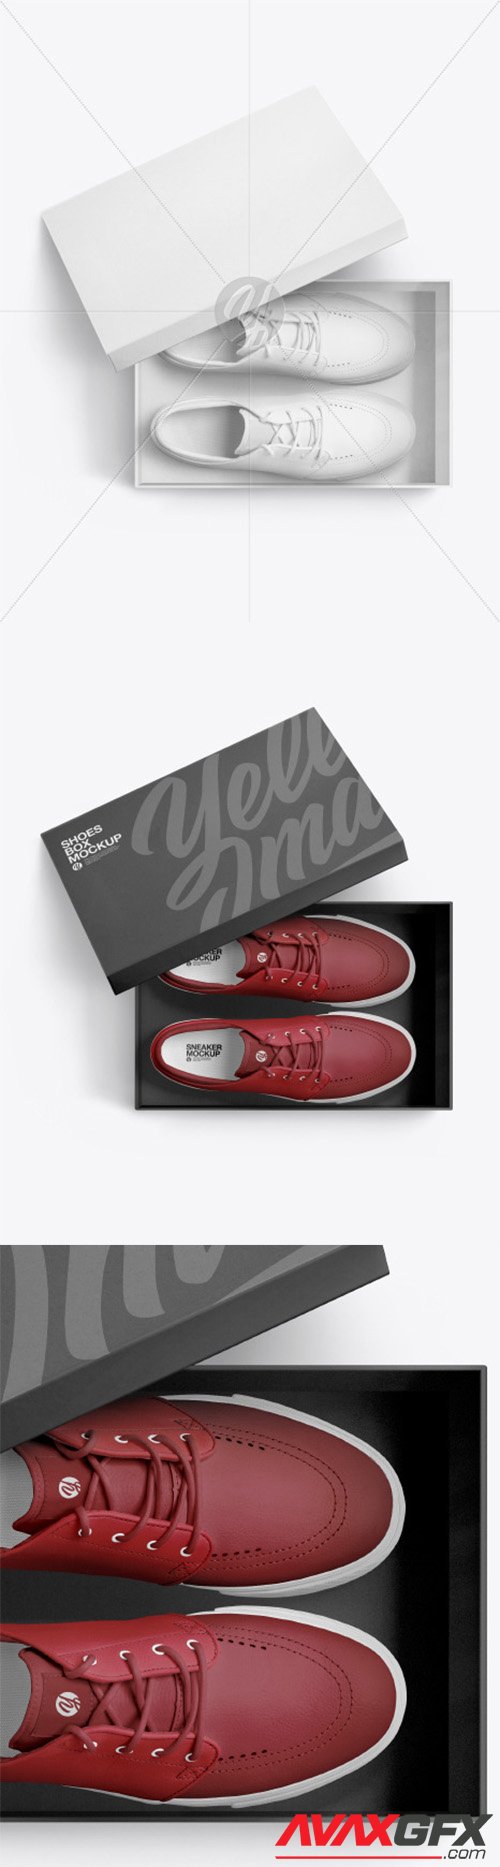 Sneakers Shoes w/ Box Mockup 60996